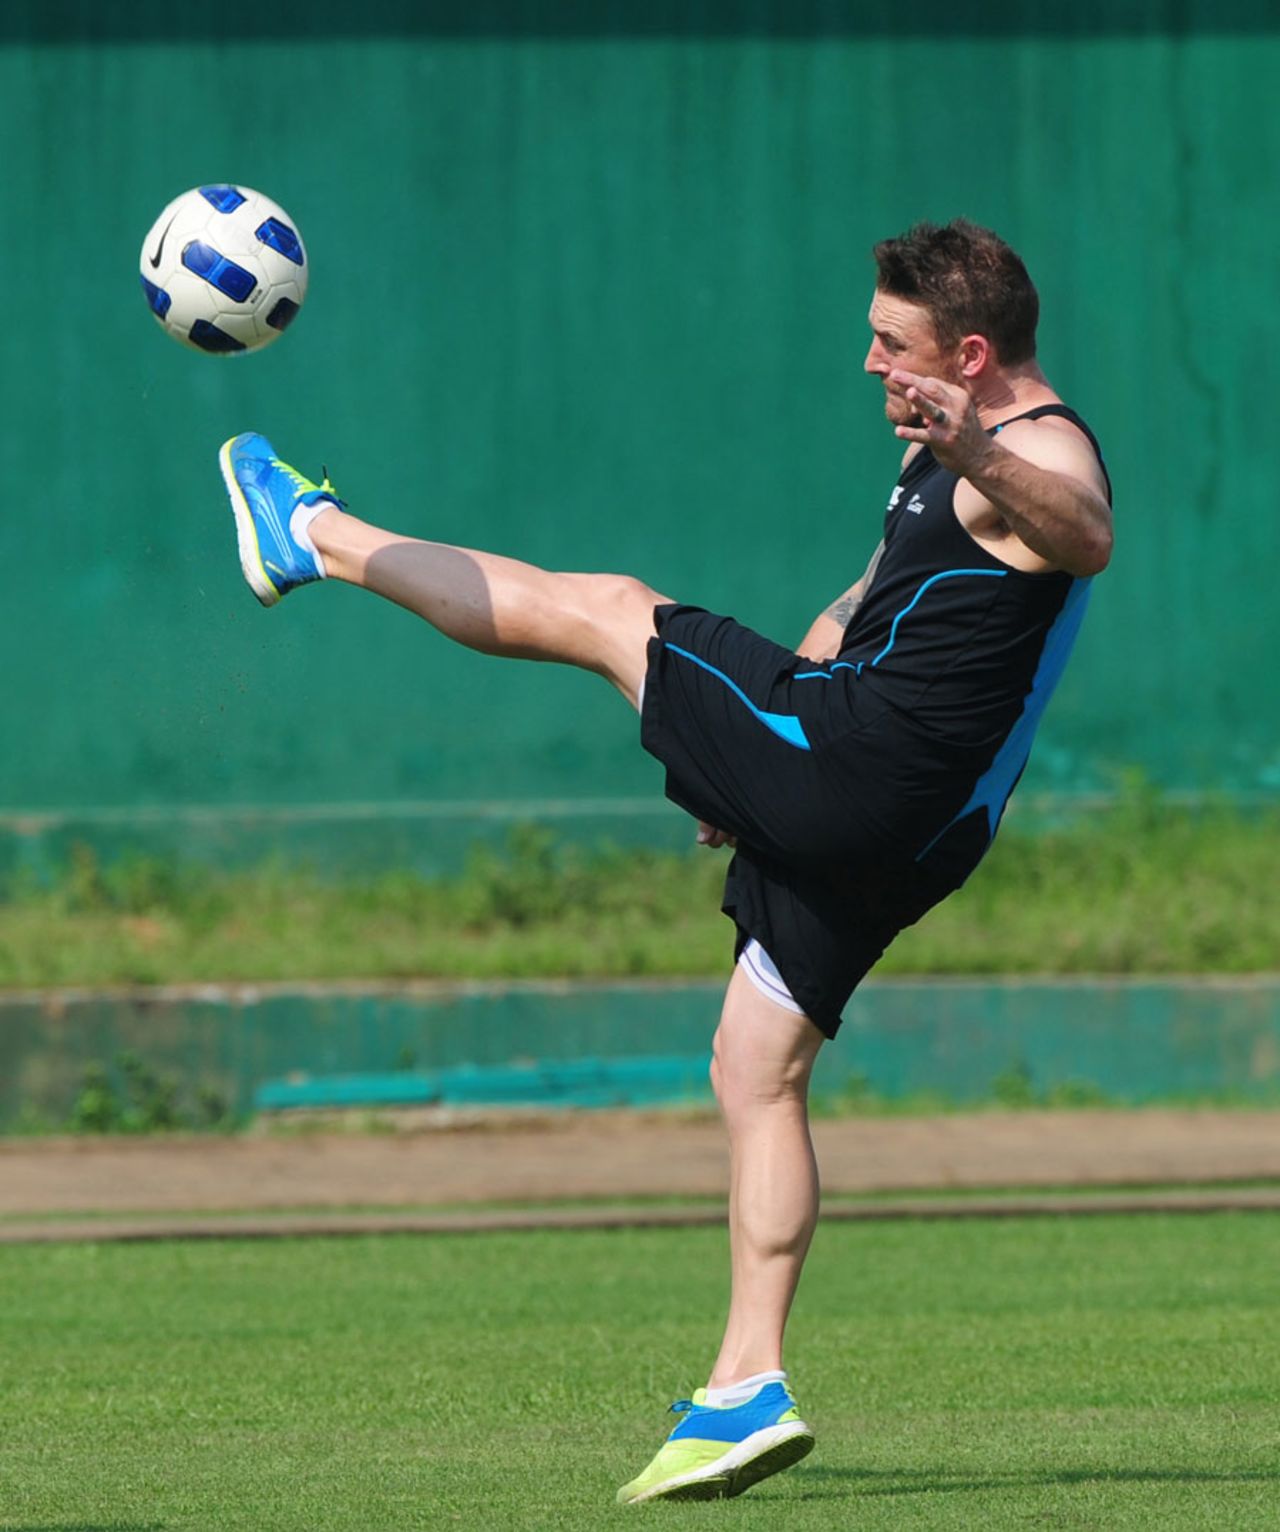 Brendon McCullum plays football during a training session, Dhaka, October 19, 2013